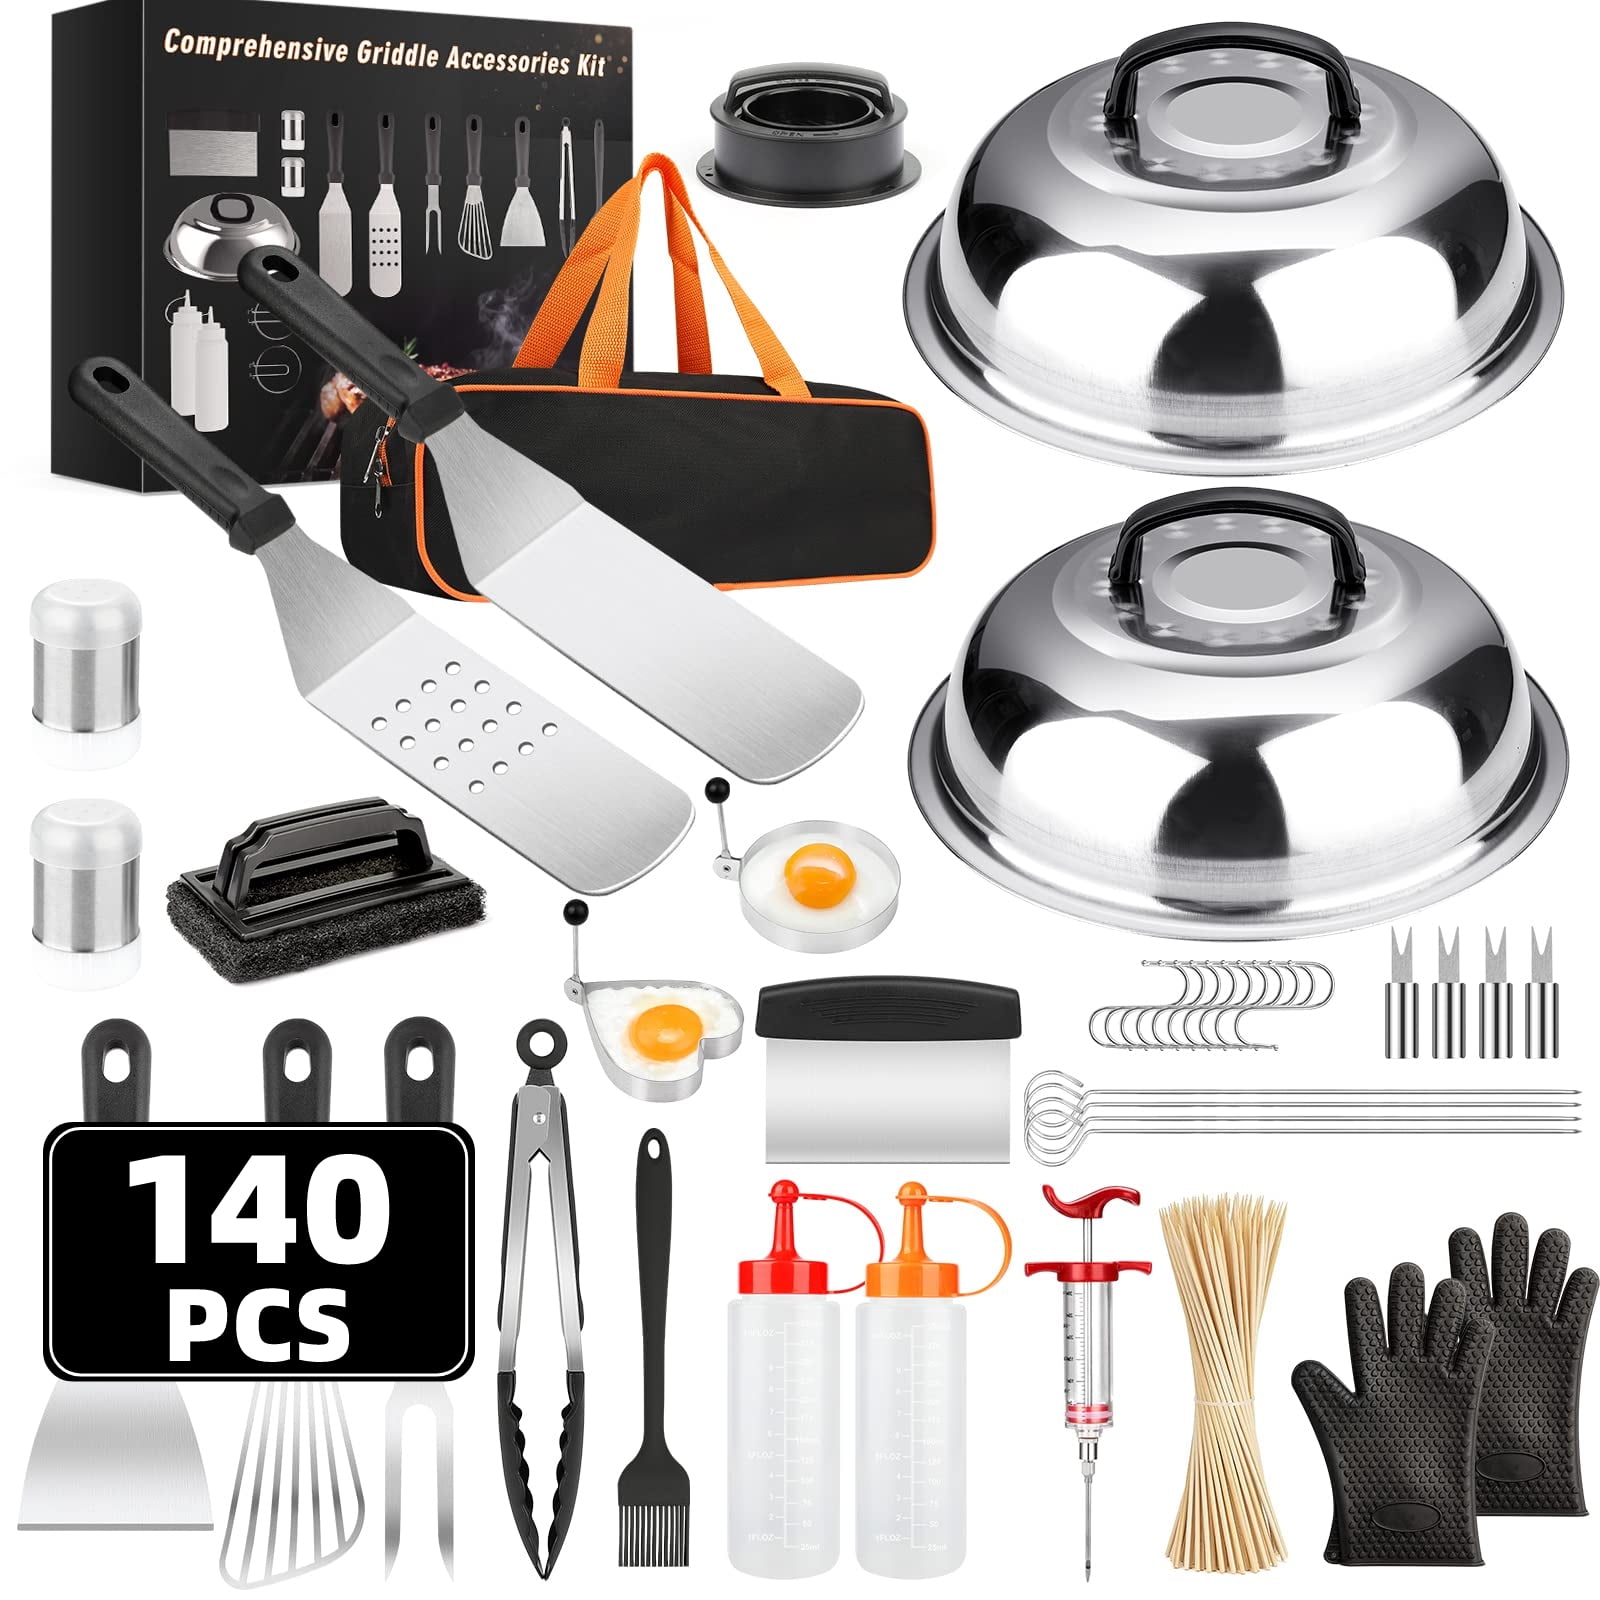  Blackstone Griddle Accessories Kit,16pcs Flat Top Grill  Accessories Set for Blackstone and Camp Chef with Spatula,Scraper,Griddle  Cleaning Kit &Carry Bag,Great for Outdoor BBQ & Teppanyaki and Camping :  Patio, Lawn